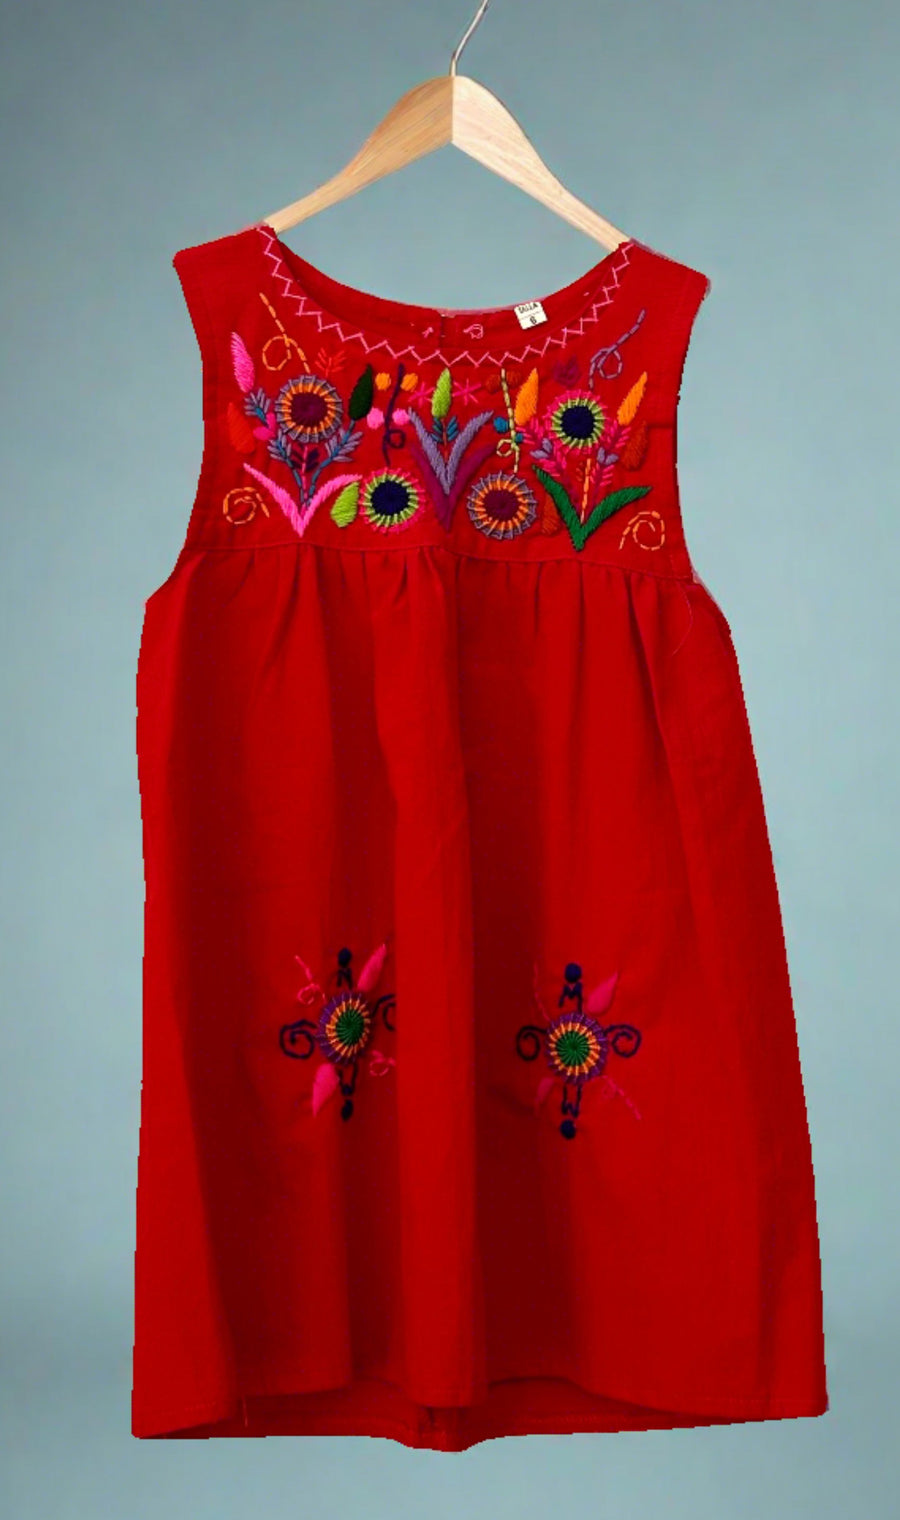 Embroidered Child's Dress